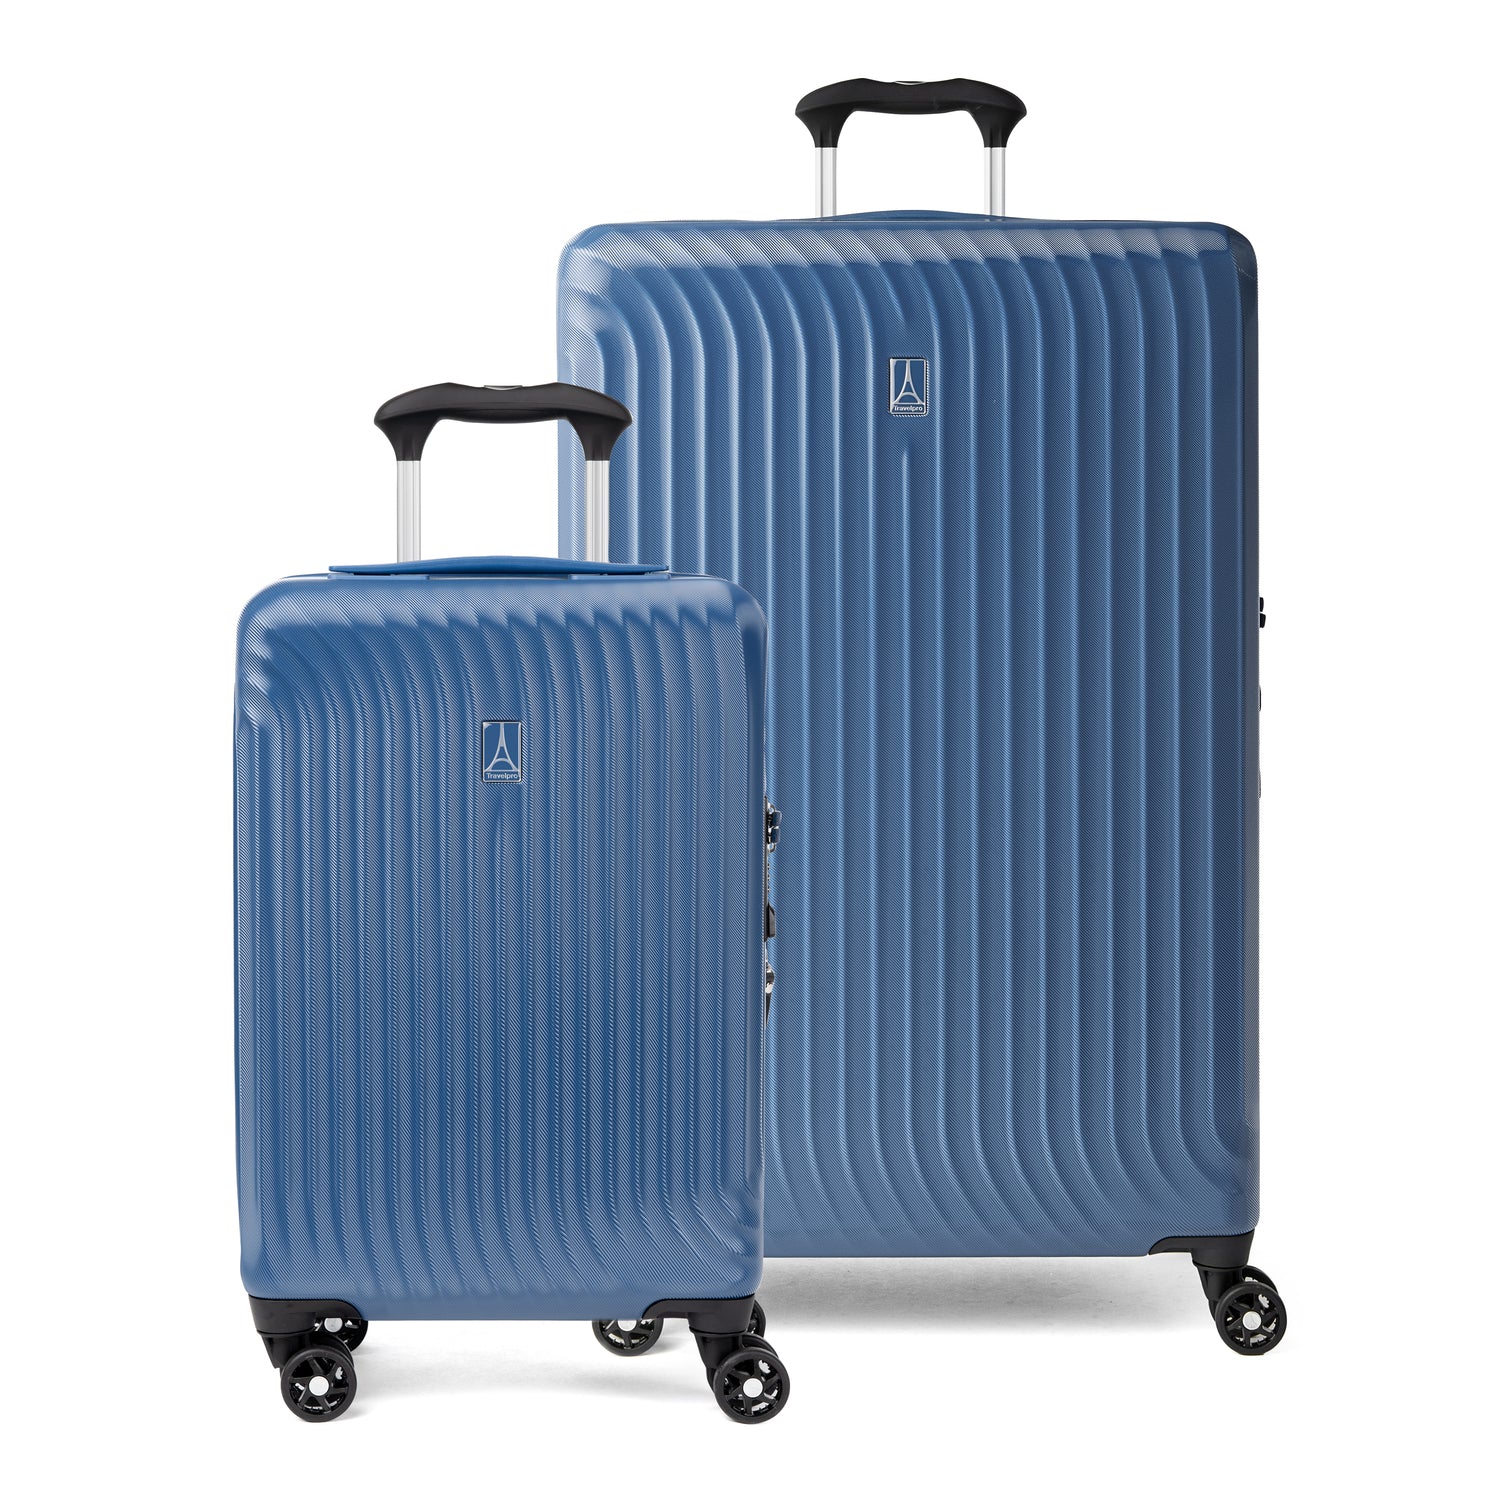 Ensemble Maxlite® Air Compact Carry-On / Large Check-in Hardside Expandable Spinner Luggage